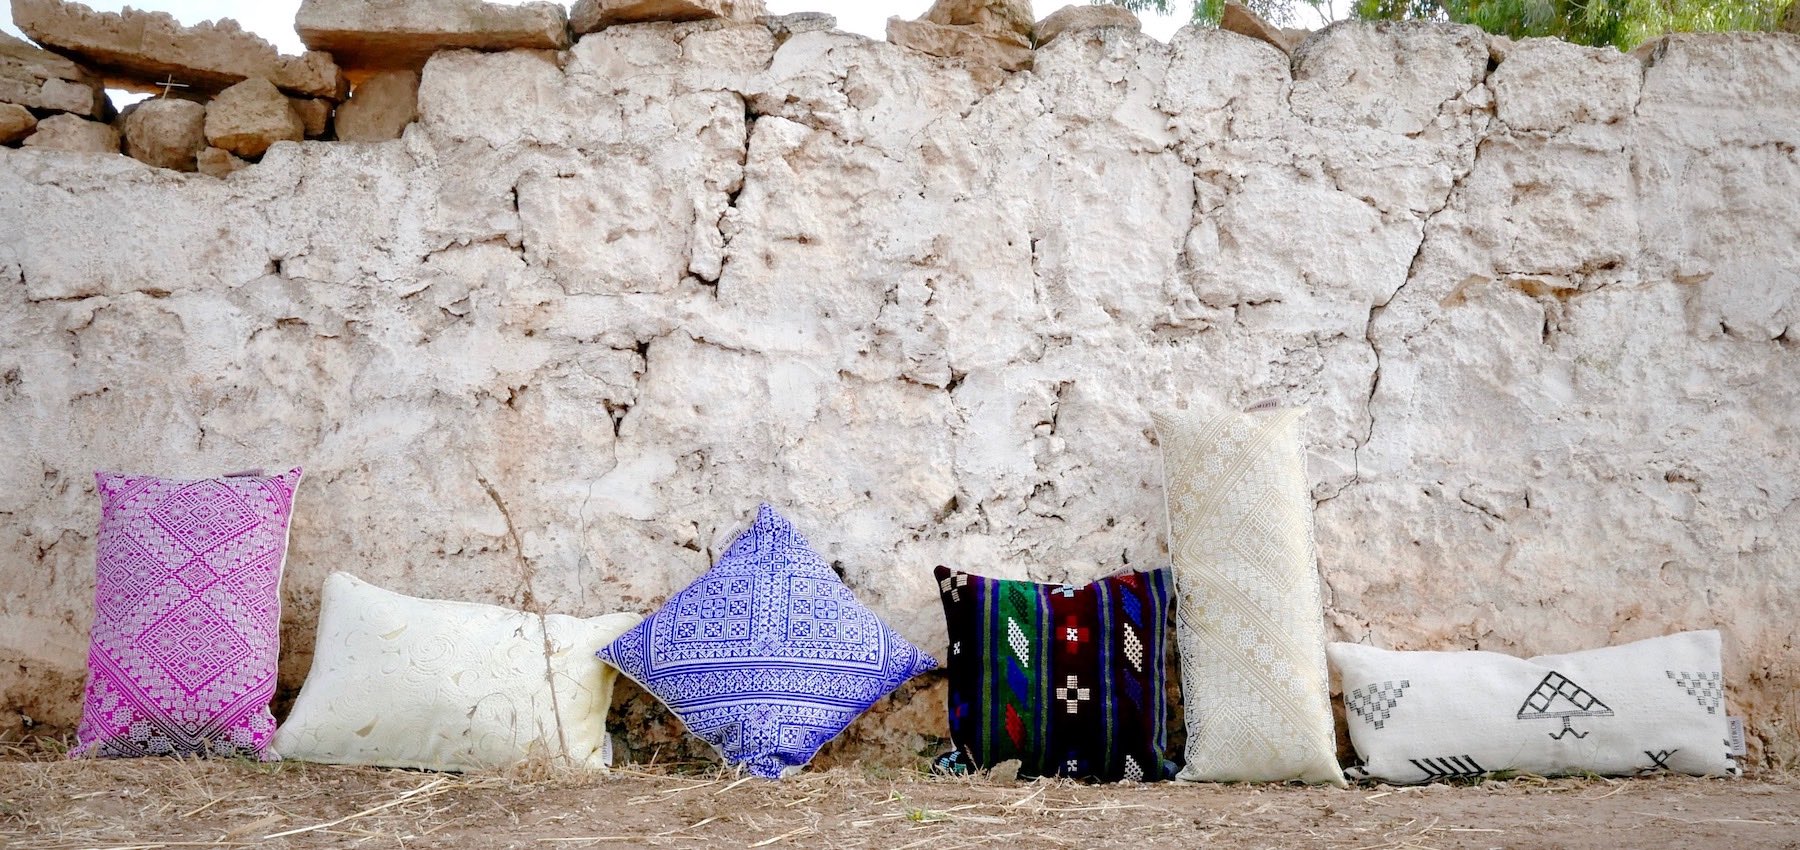 Six decorative Moroccan pillows in front of a stone wall.